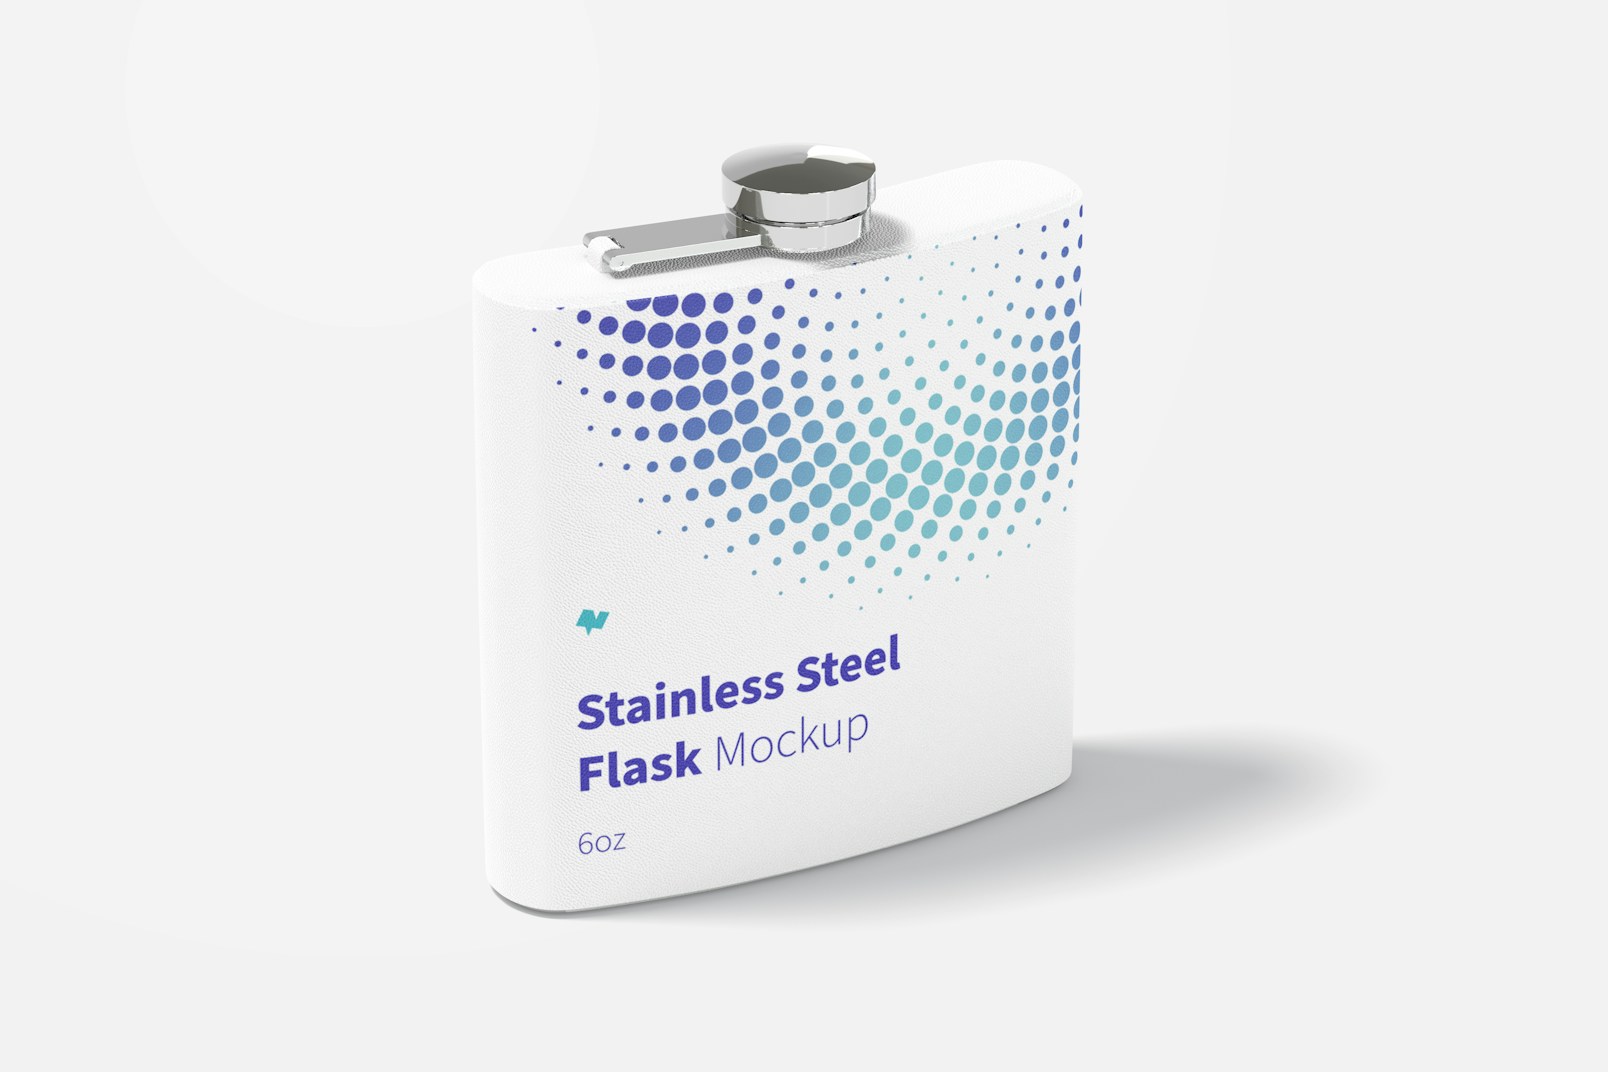 Powder Coated Stainless Steel Flask Mockup